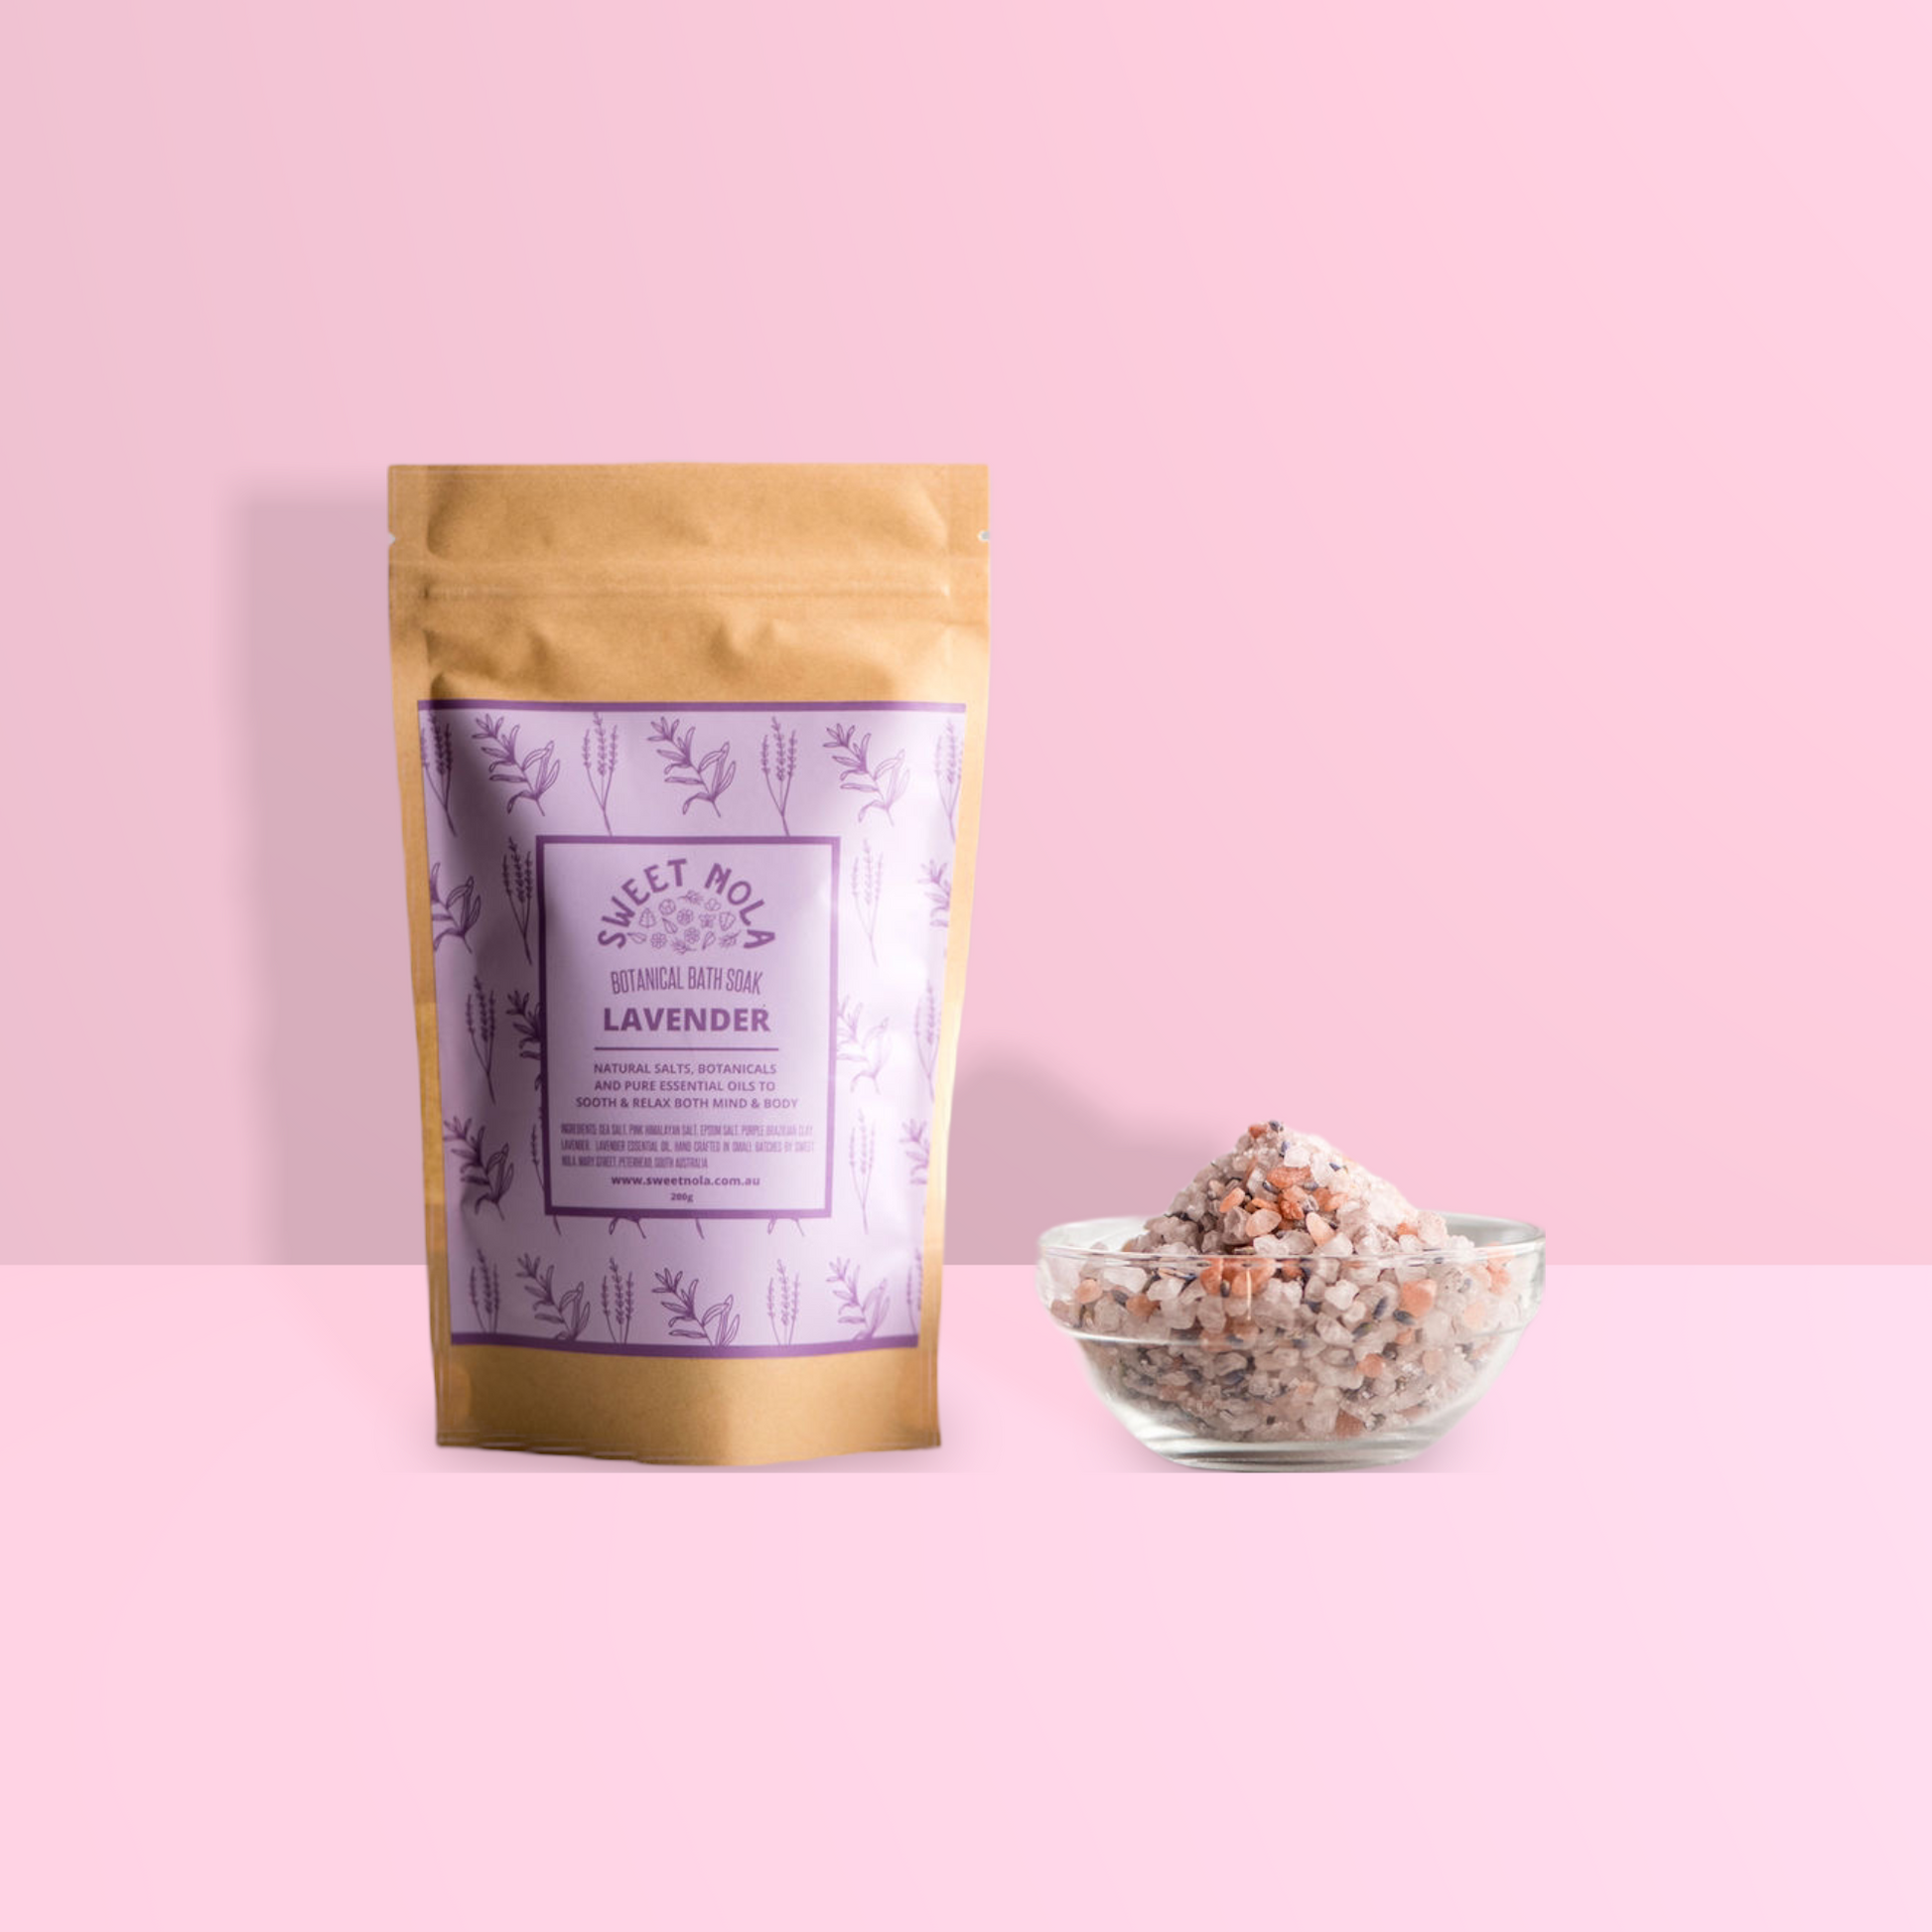 Lavender Bath soak in paper stand up pouch with purple label. On the right is a small glass bowl filled with the bath soak salts.